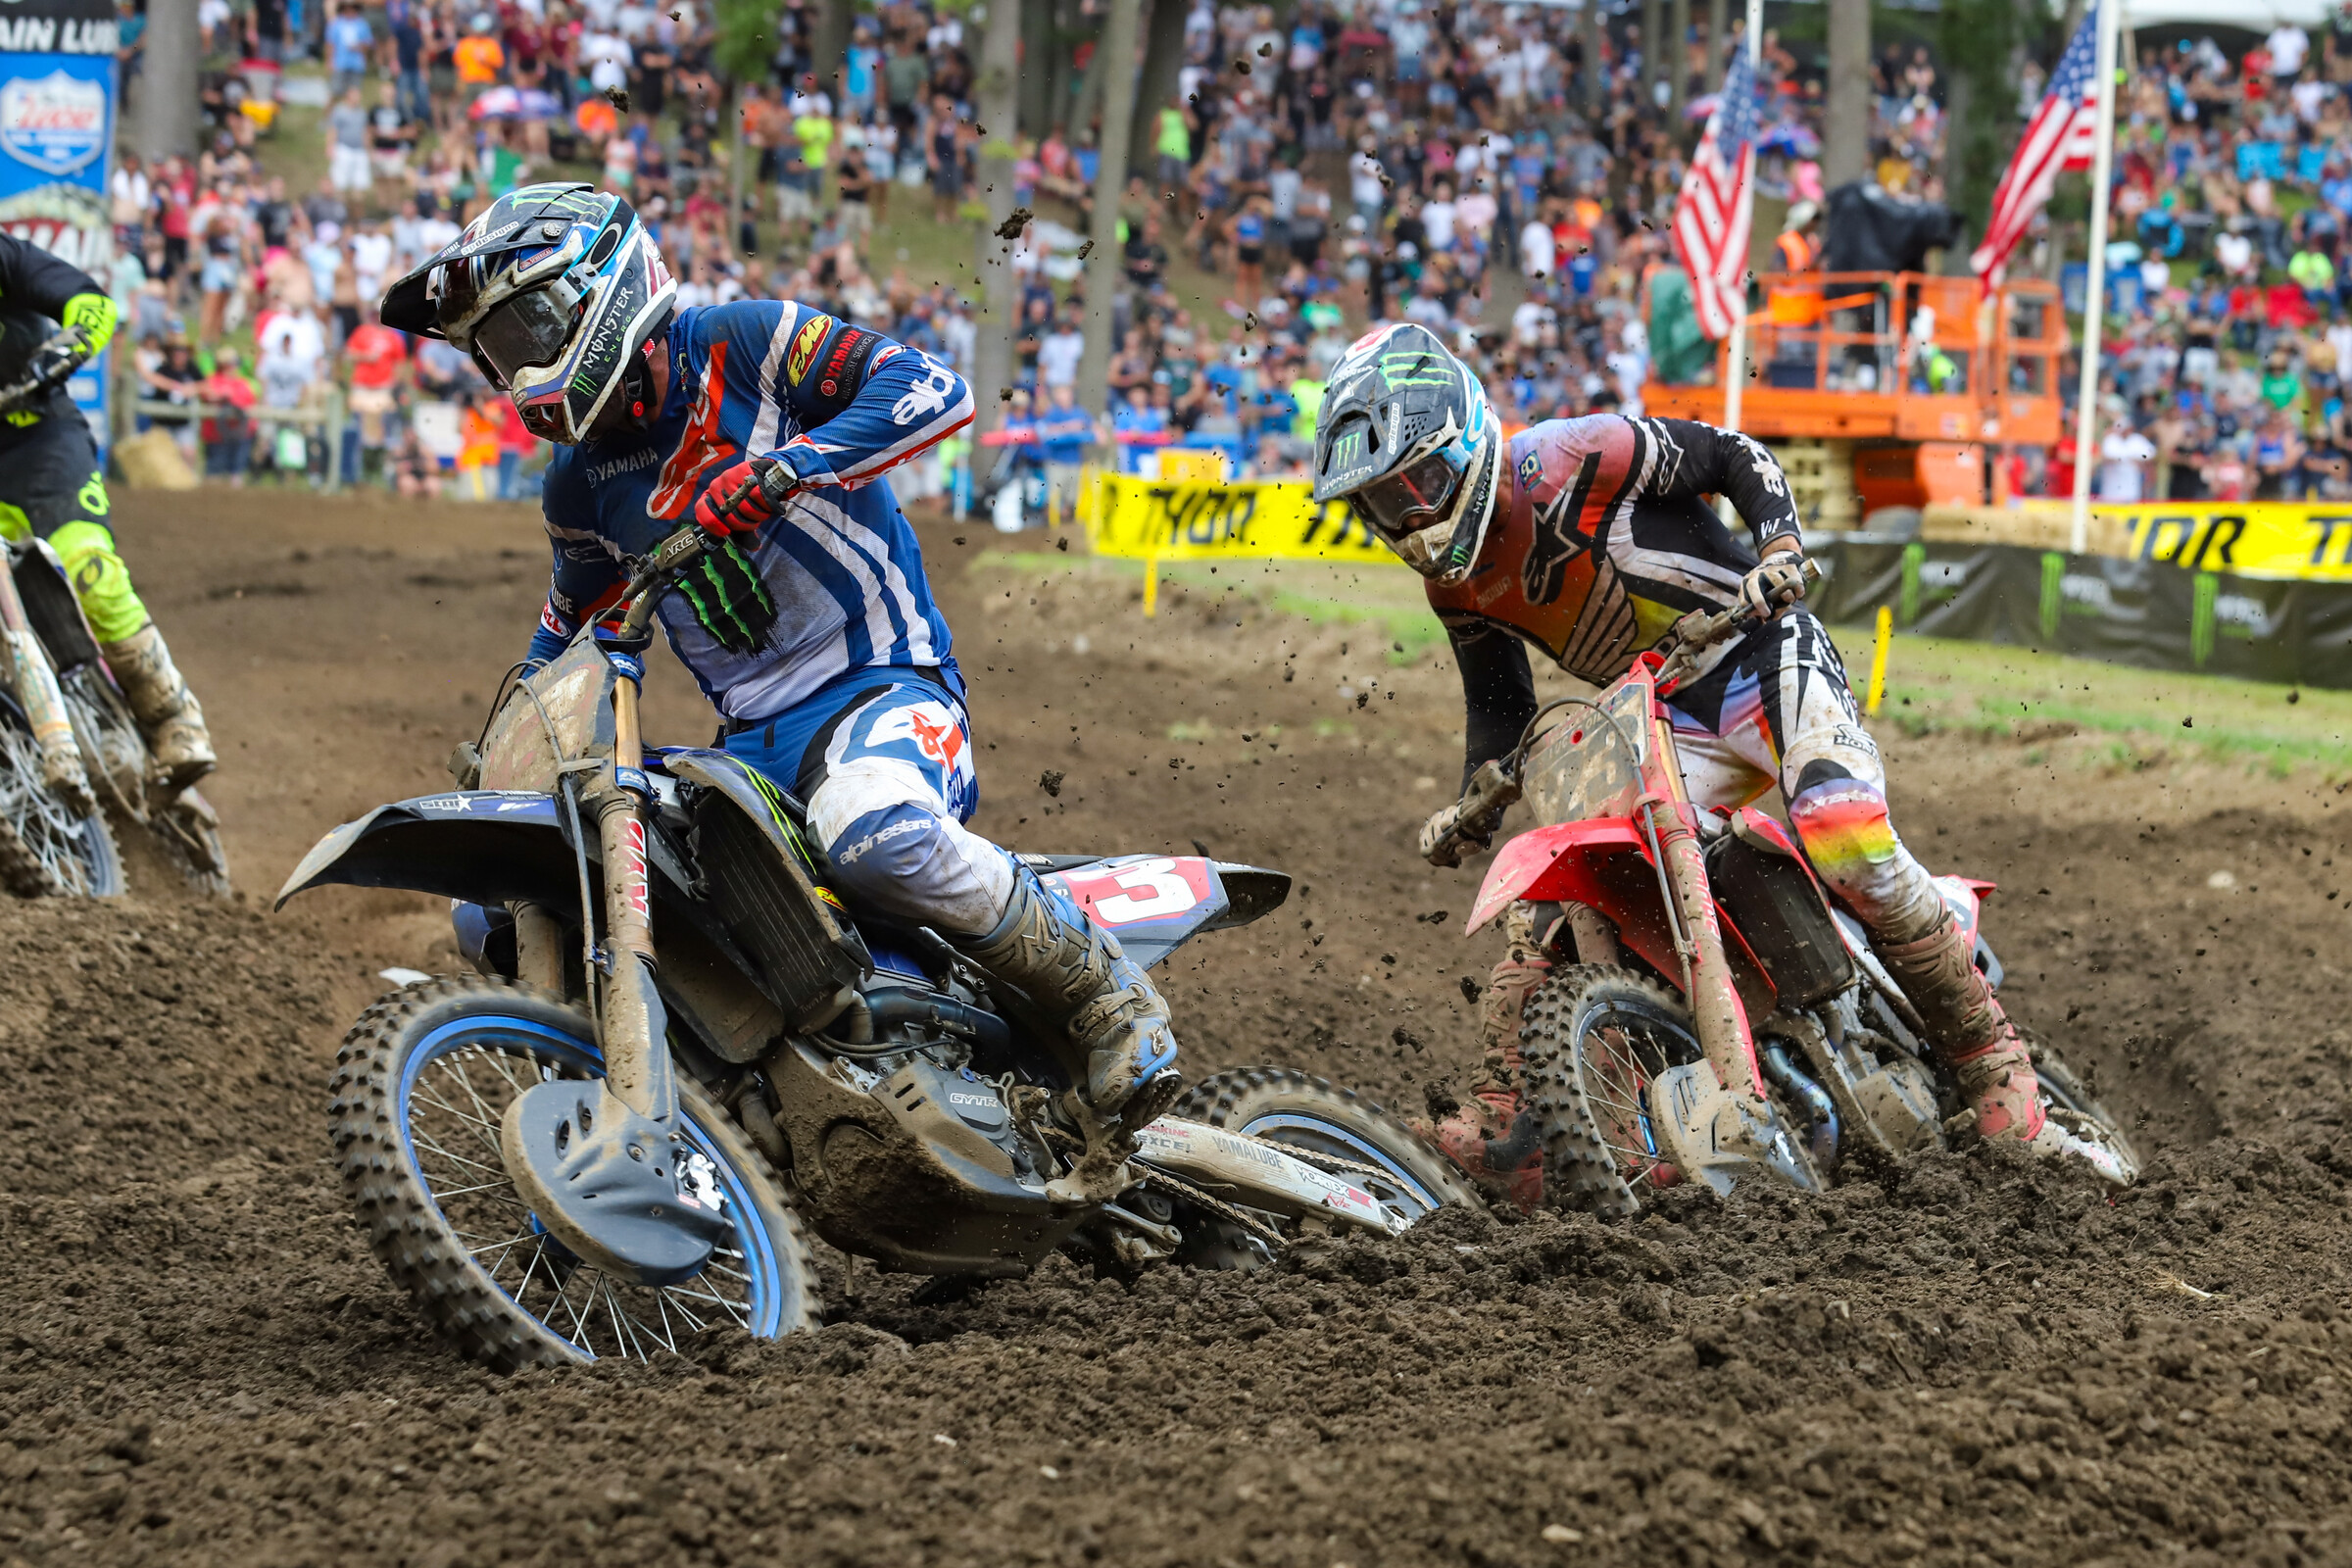 Watch Every Pass for the Lead in 250 and 450 Class of 2022 Pro Motocross